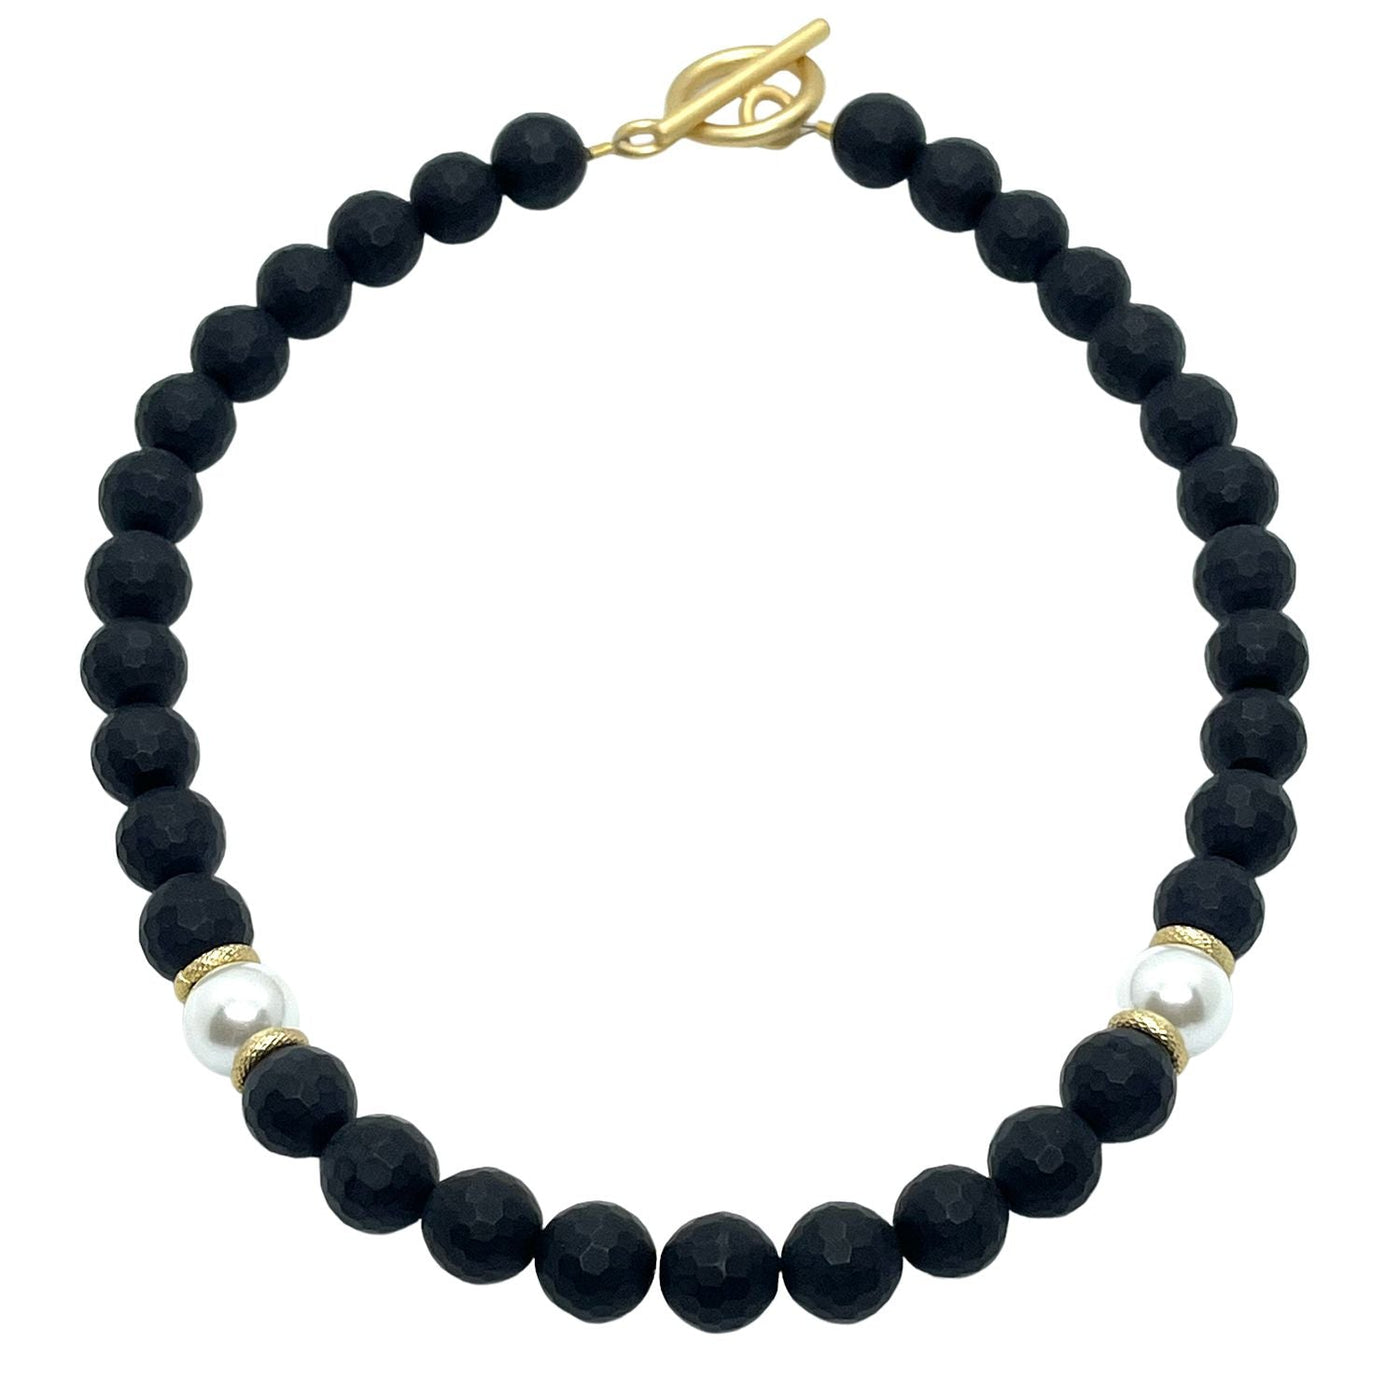 Black Onyx With Pearl Accents Beaded Necklace